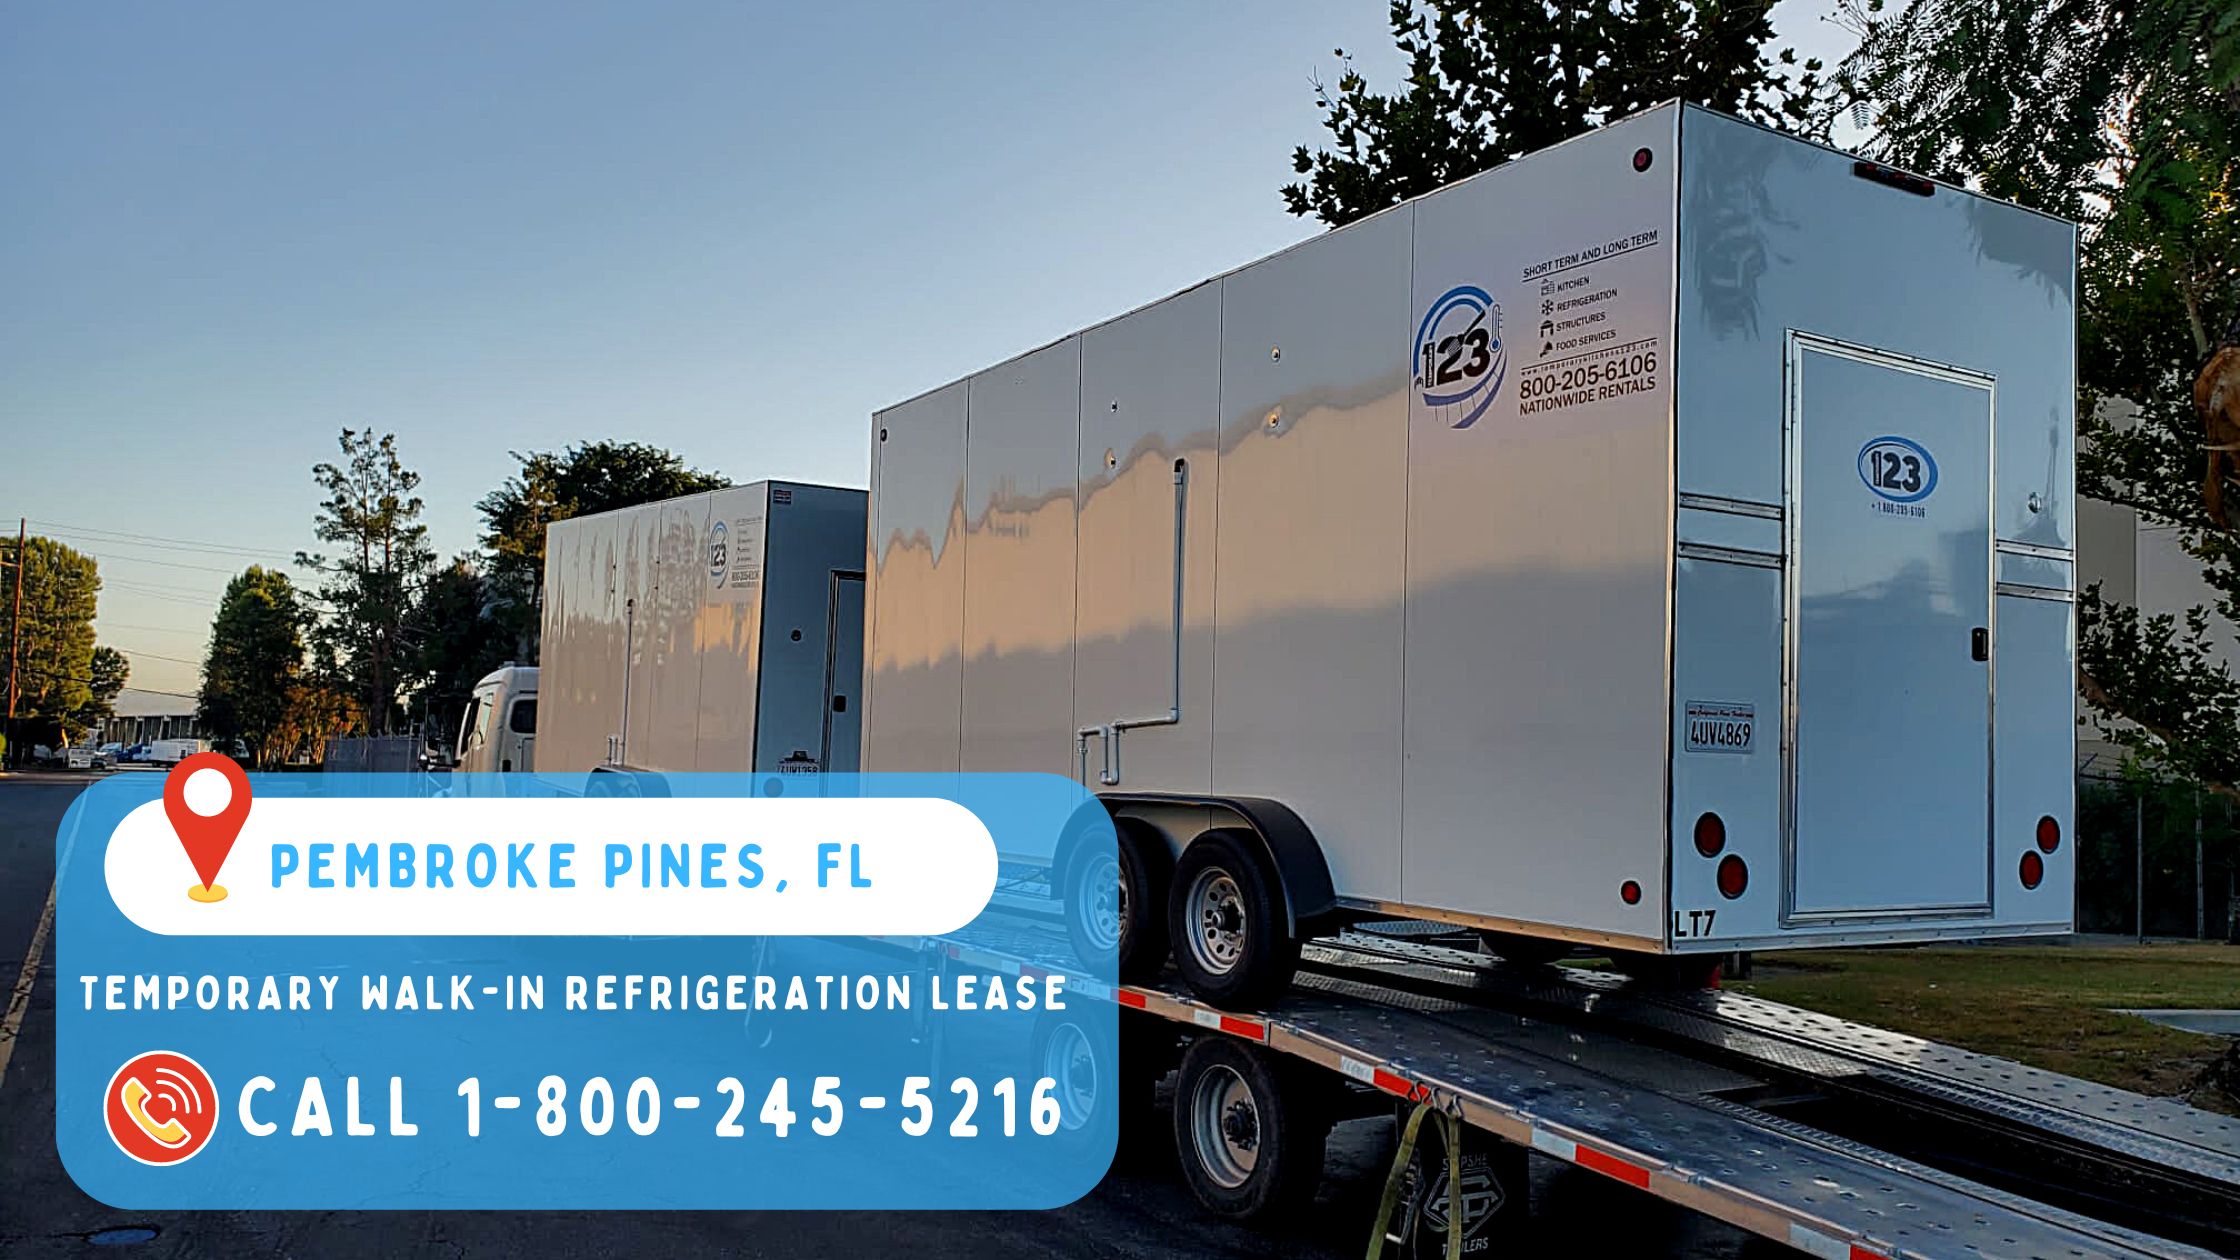 Temporary Walk-In Refrigeration Lease in Pembroke Pines